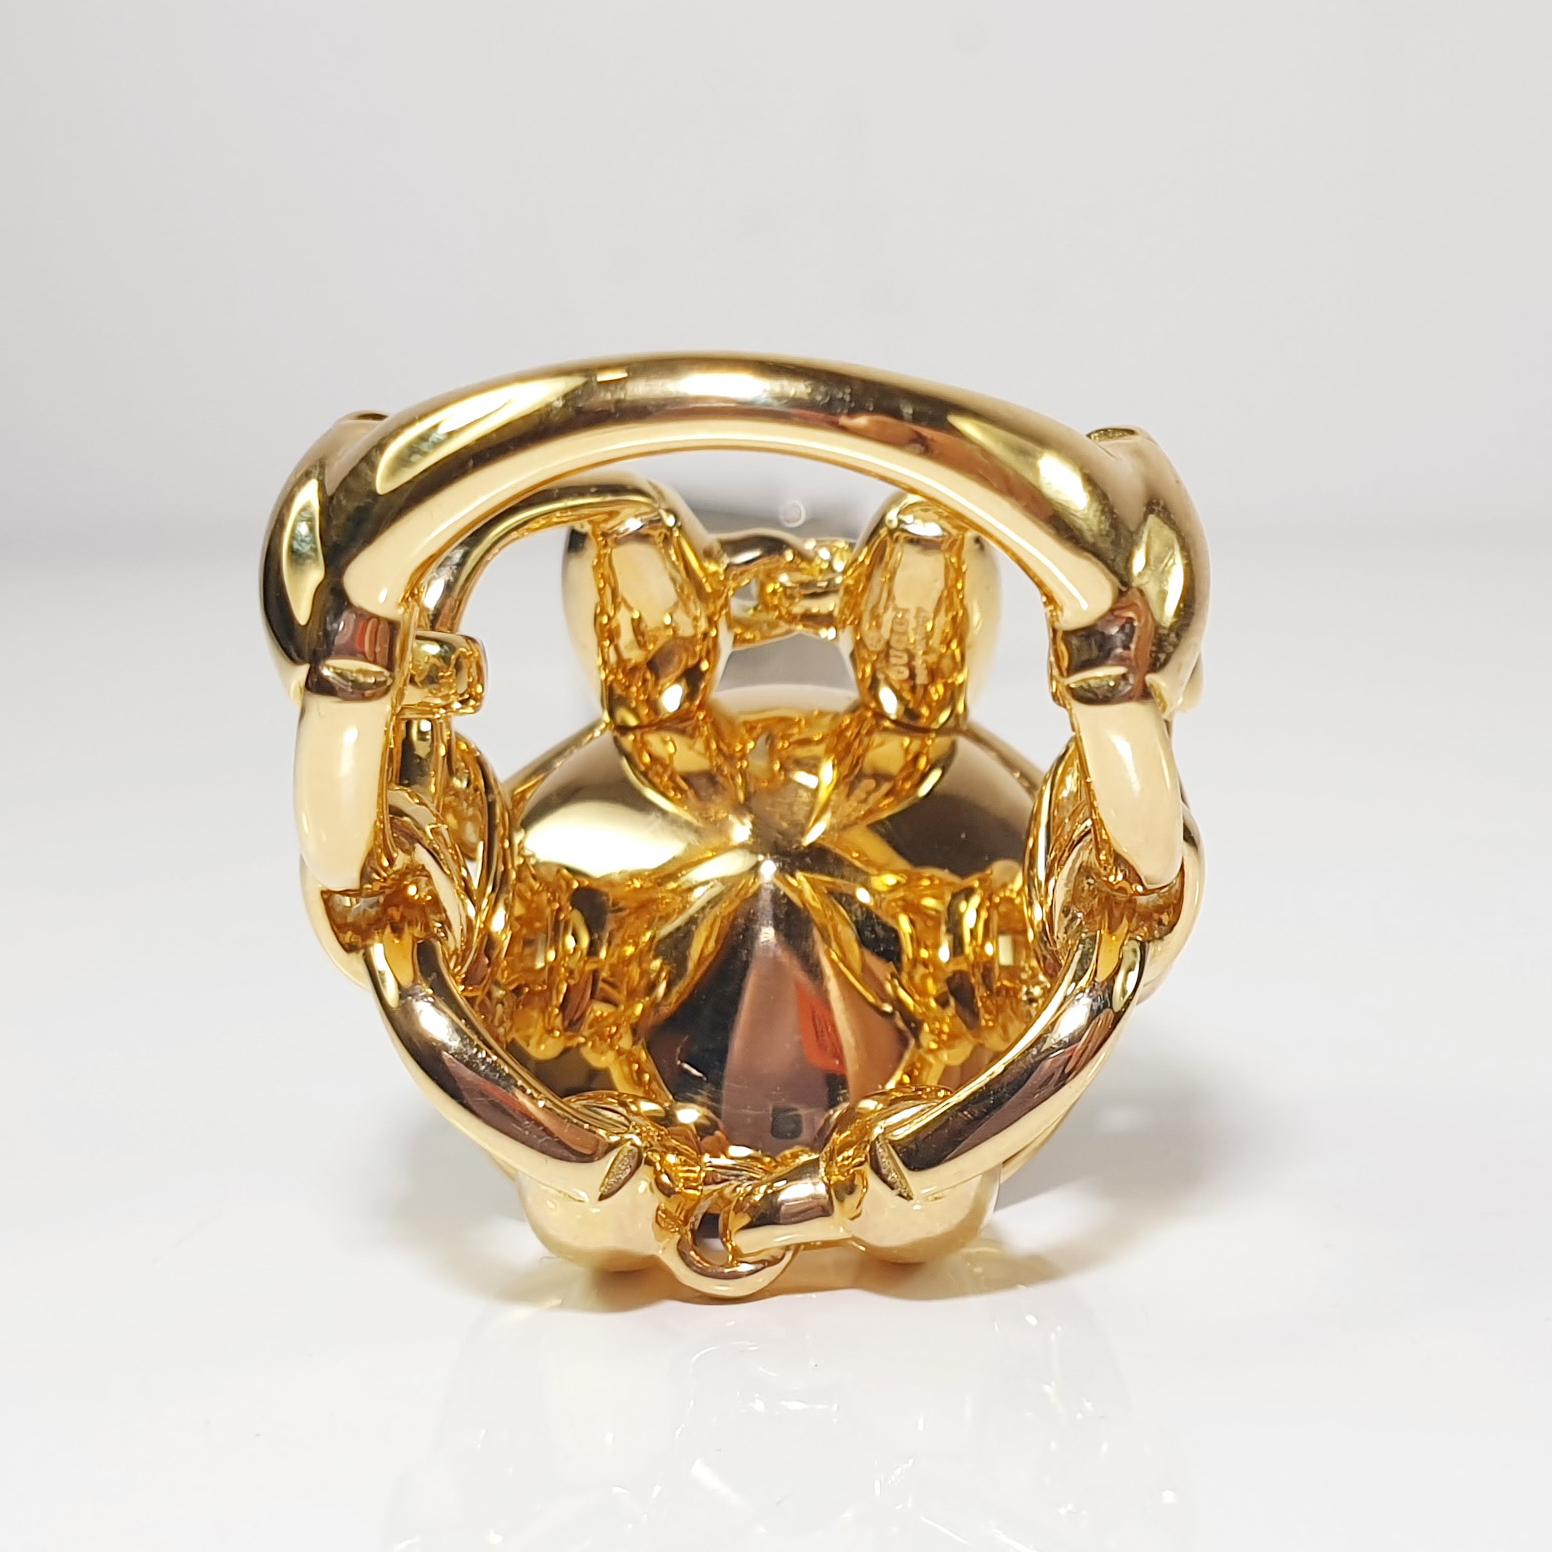 Contemporary Gucci Horsebit Equestrian 18k Gold Cocktail Ring with Pink Sapphires